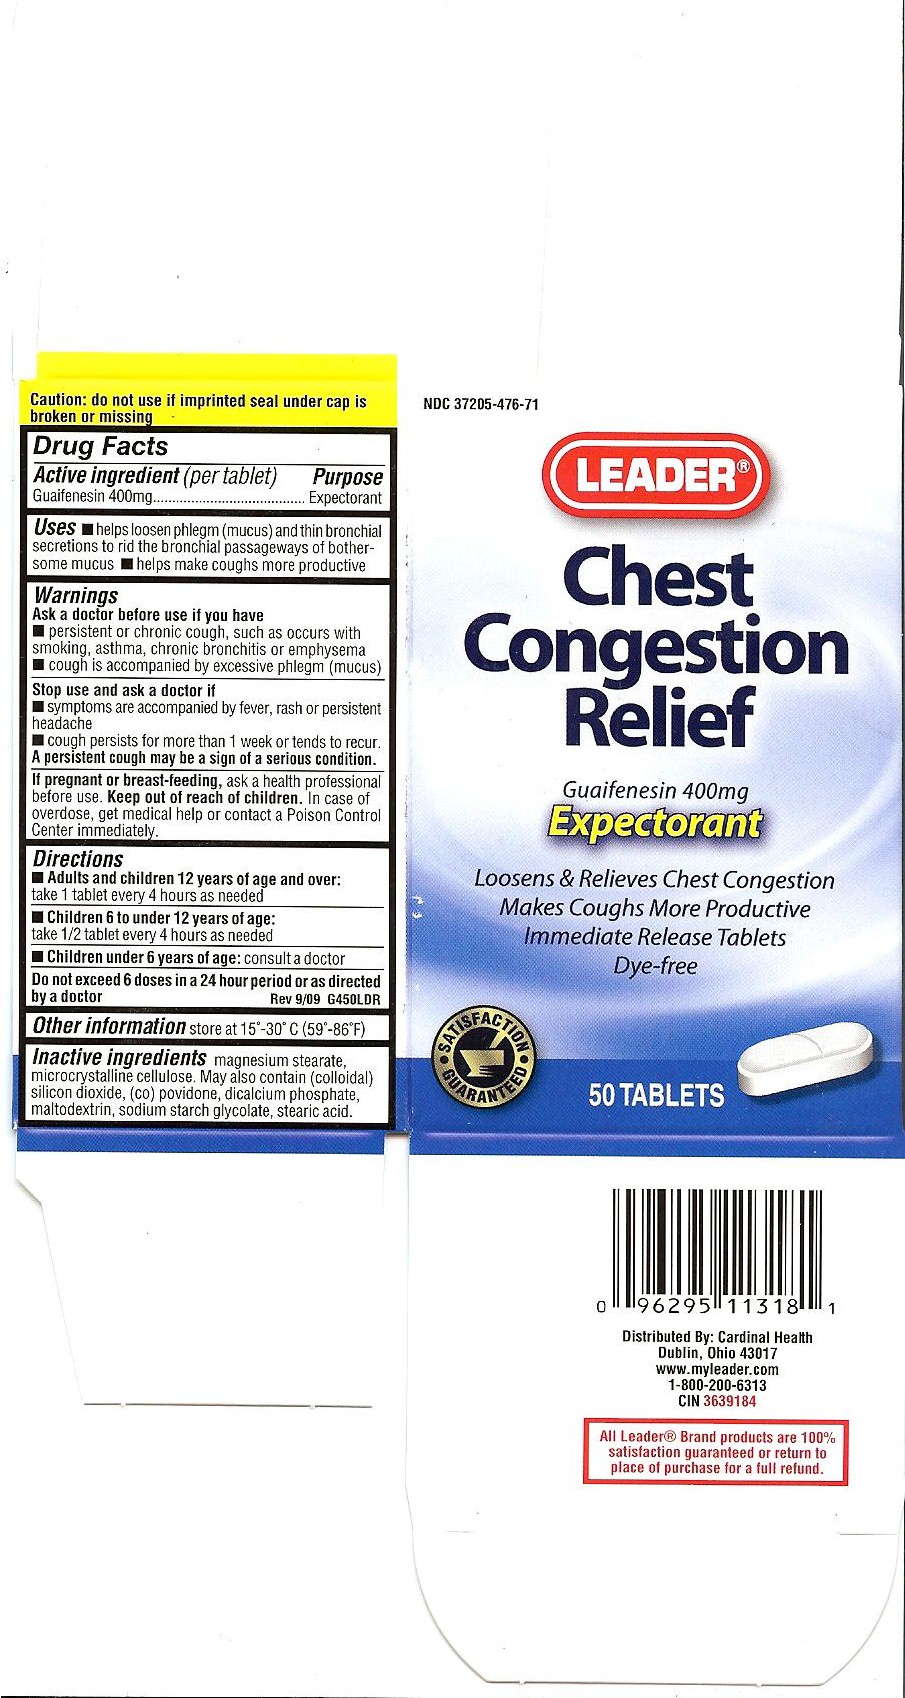 Leader Chest Congestion Relief G450 | Guaifenesin Tablet while Breastfeeding